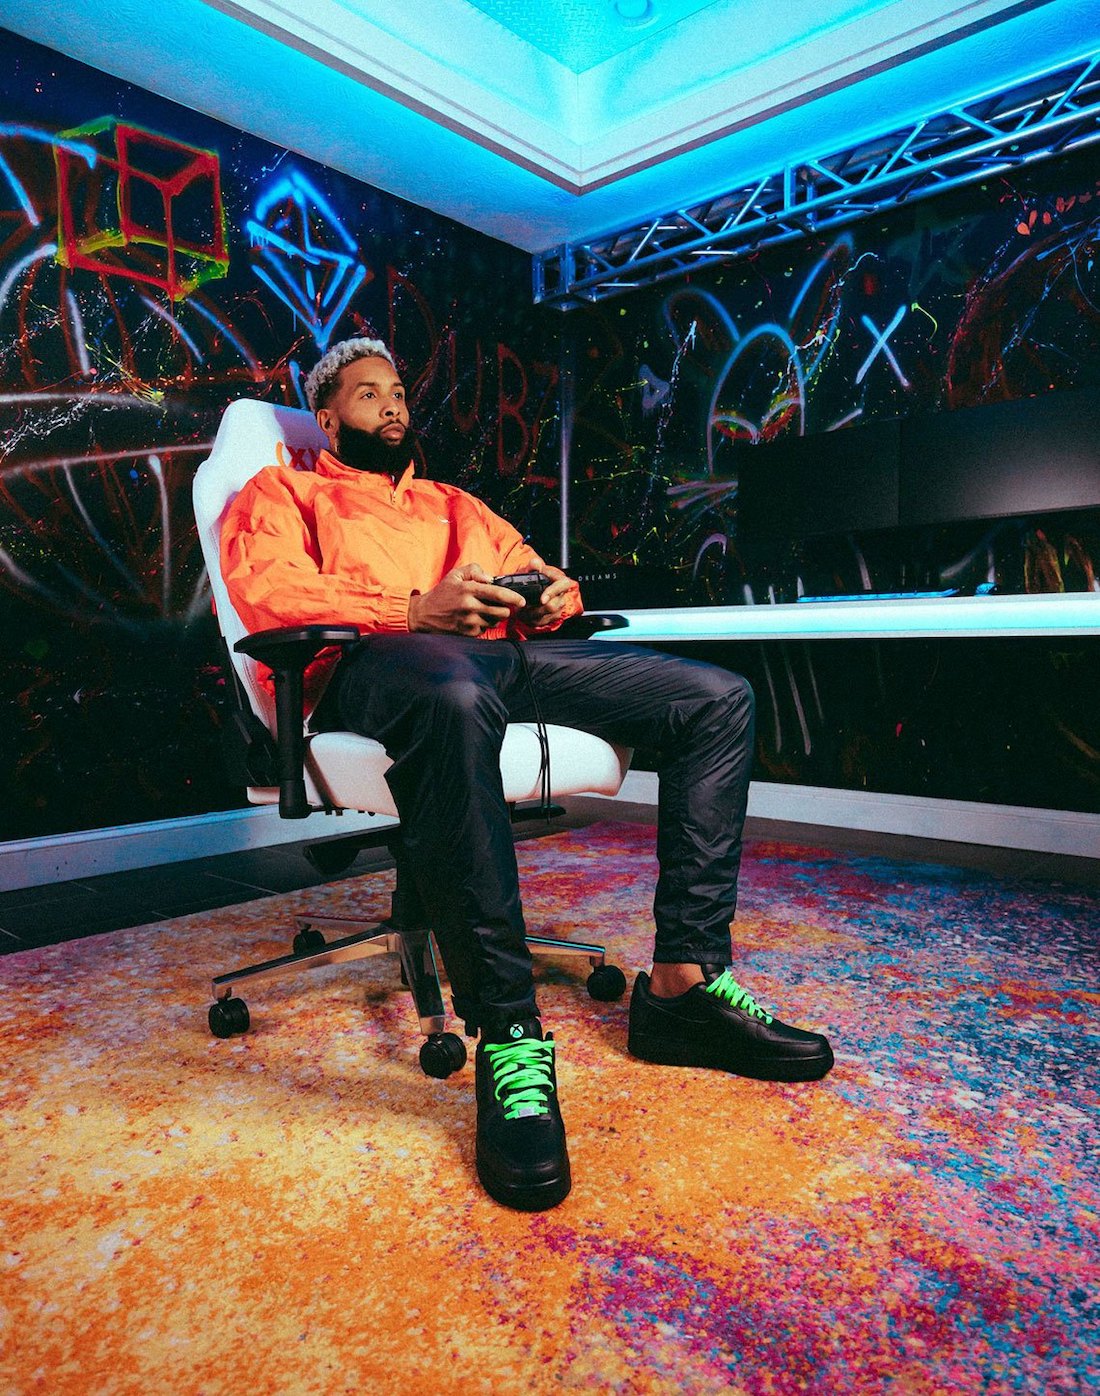 OBJ Xbox Nike Air Force 1 Power Your Dreams Release Date